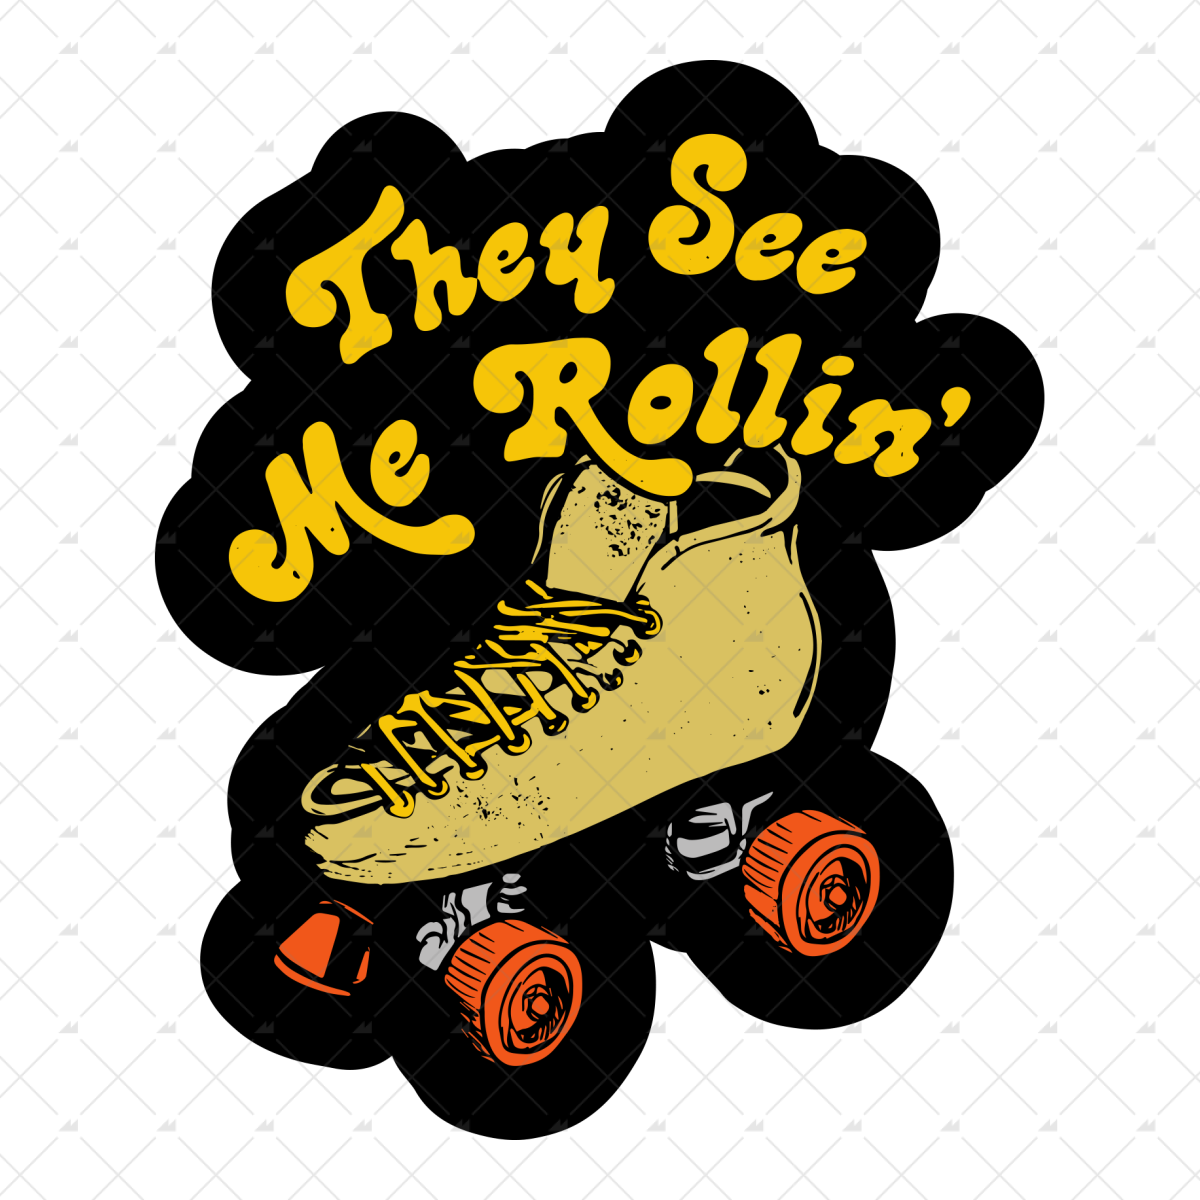 They See Me Rollin' Skates - Sticker